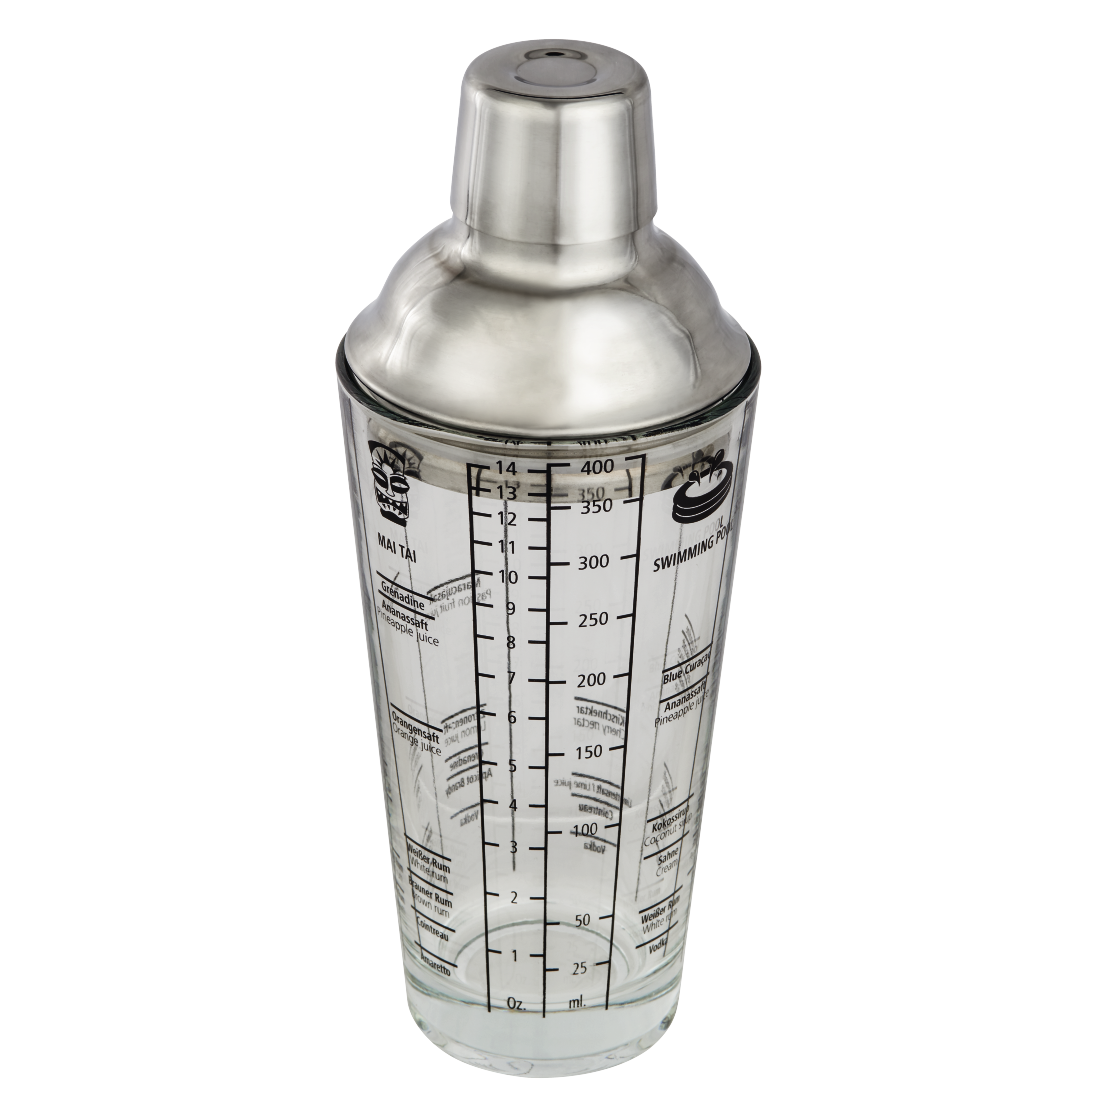 abx High-Res Image - Xavax, Cocktail Shaker, made of glass, 400 ml